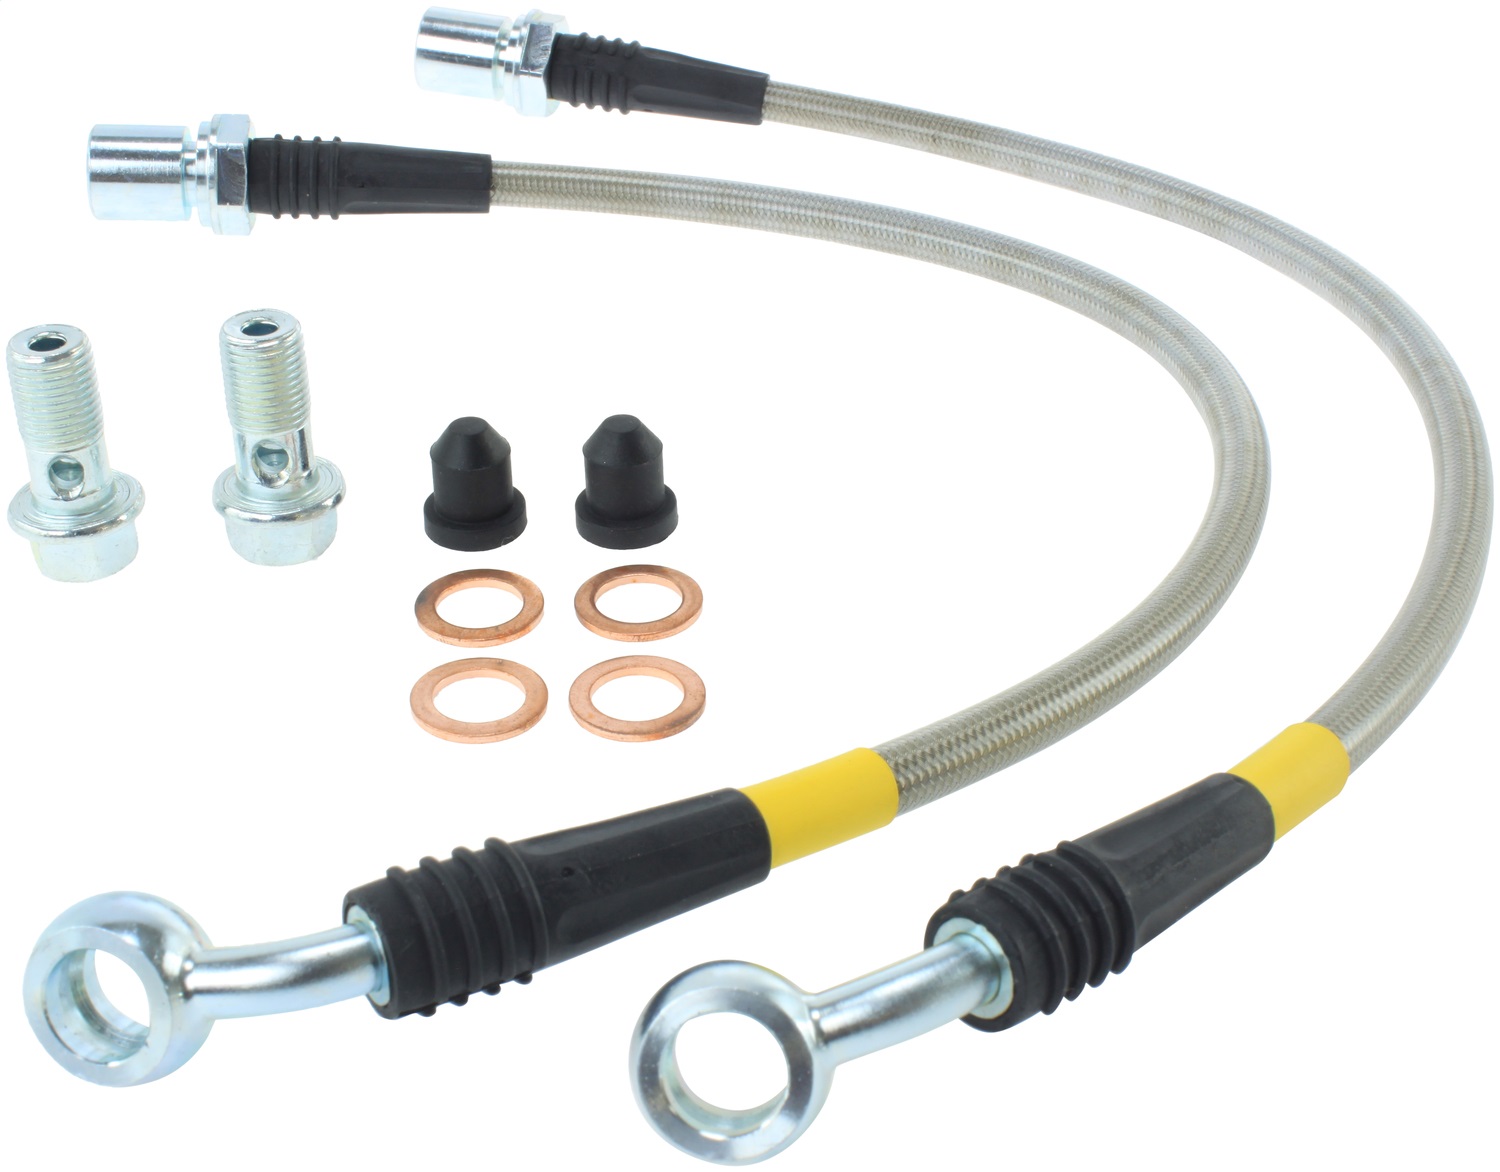 StopTech 950.44501 Stainless Steel Hose Set Fits 98-10 GS300 GS400 GS430 SC430